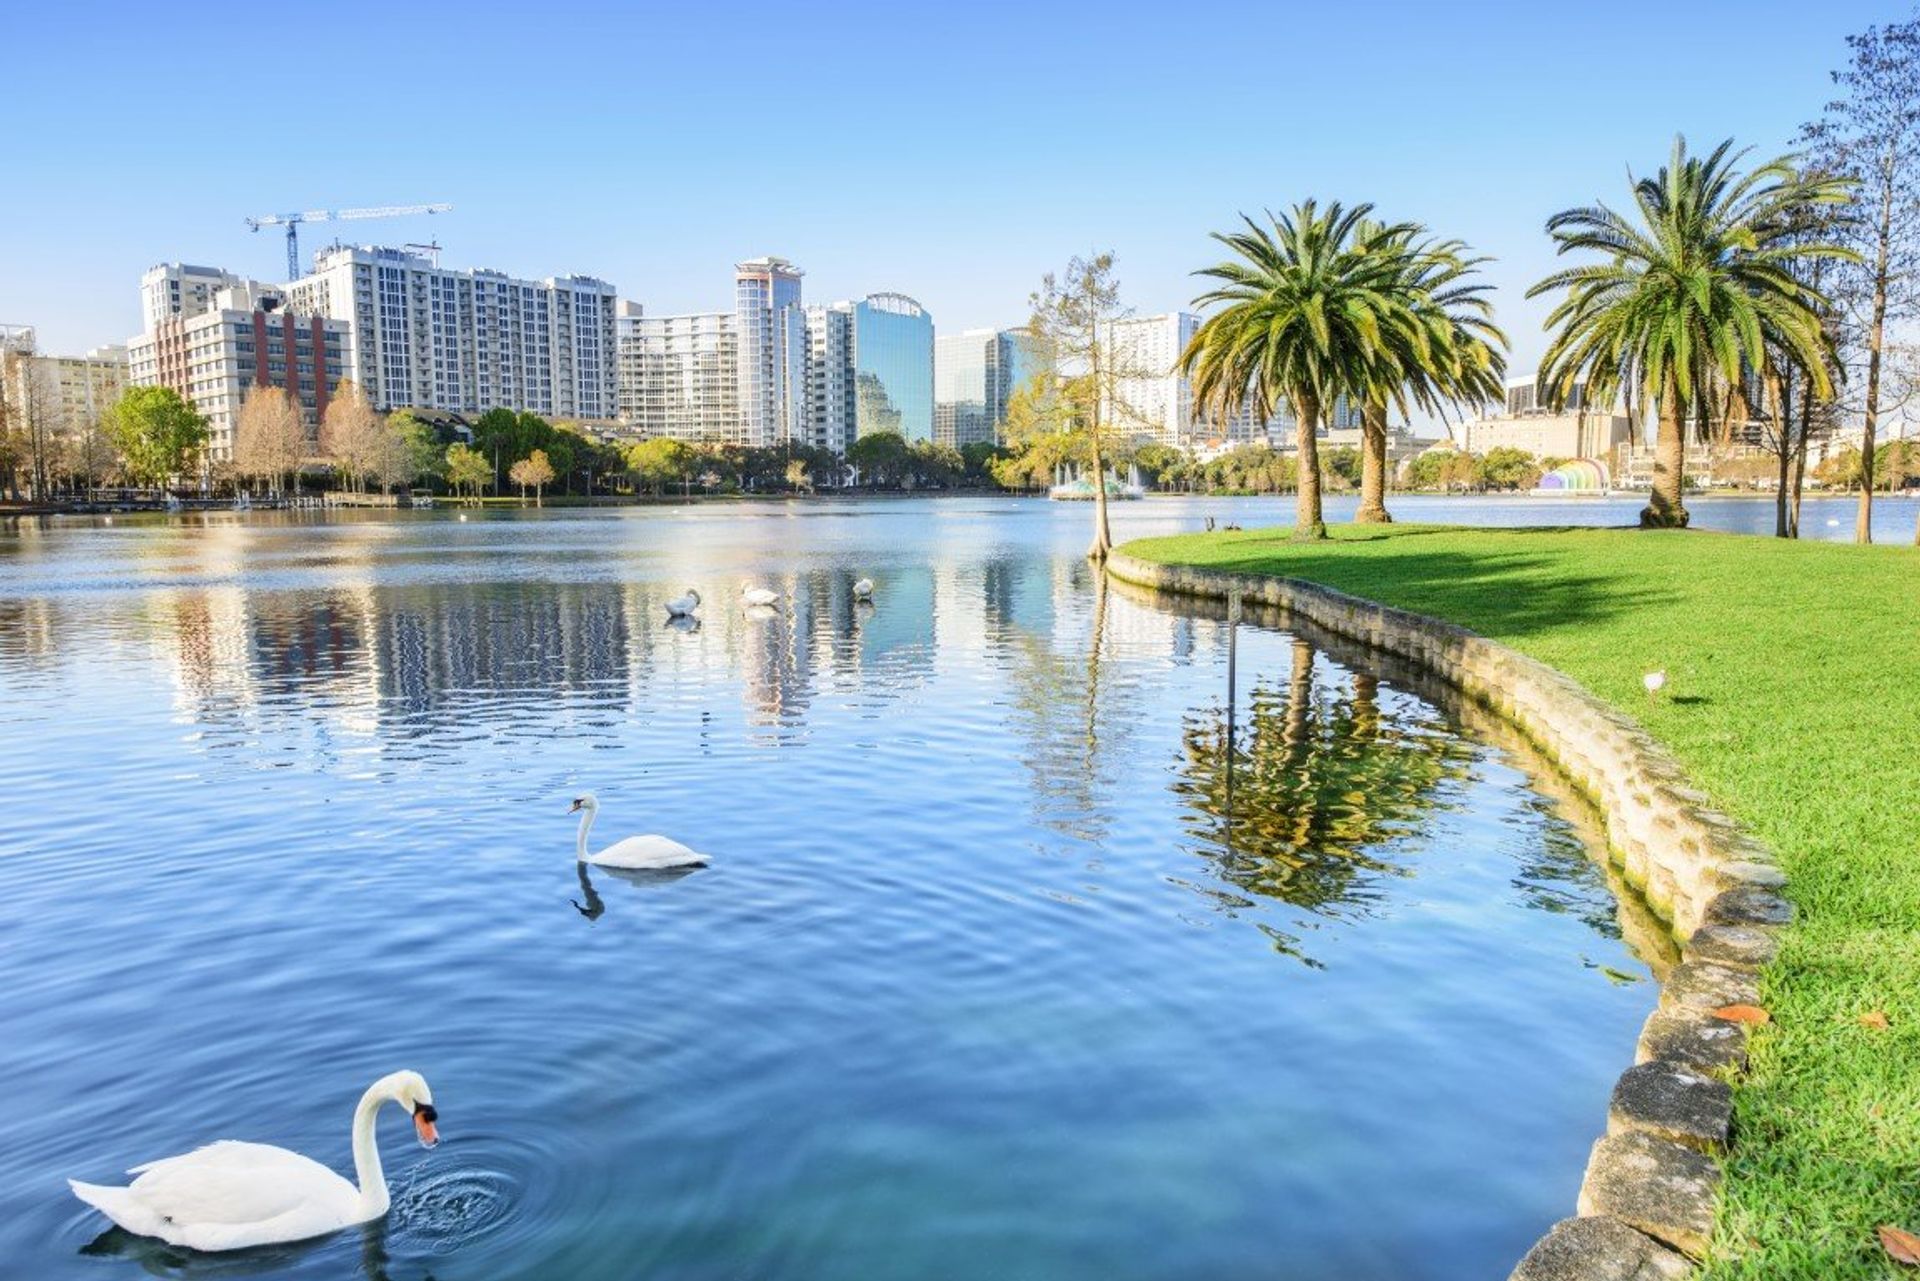 Take a swan boat down Lake Eola, home to 50 real life swans!